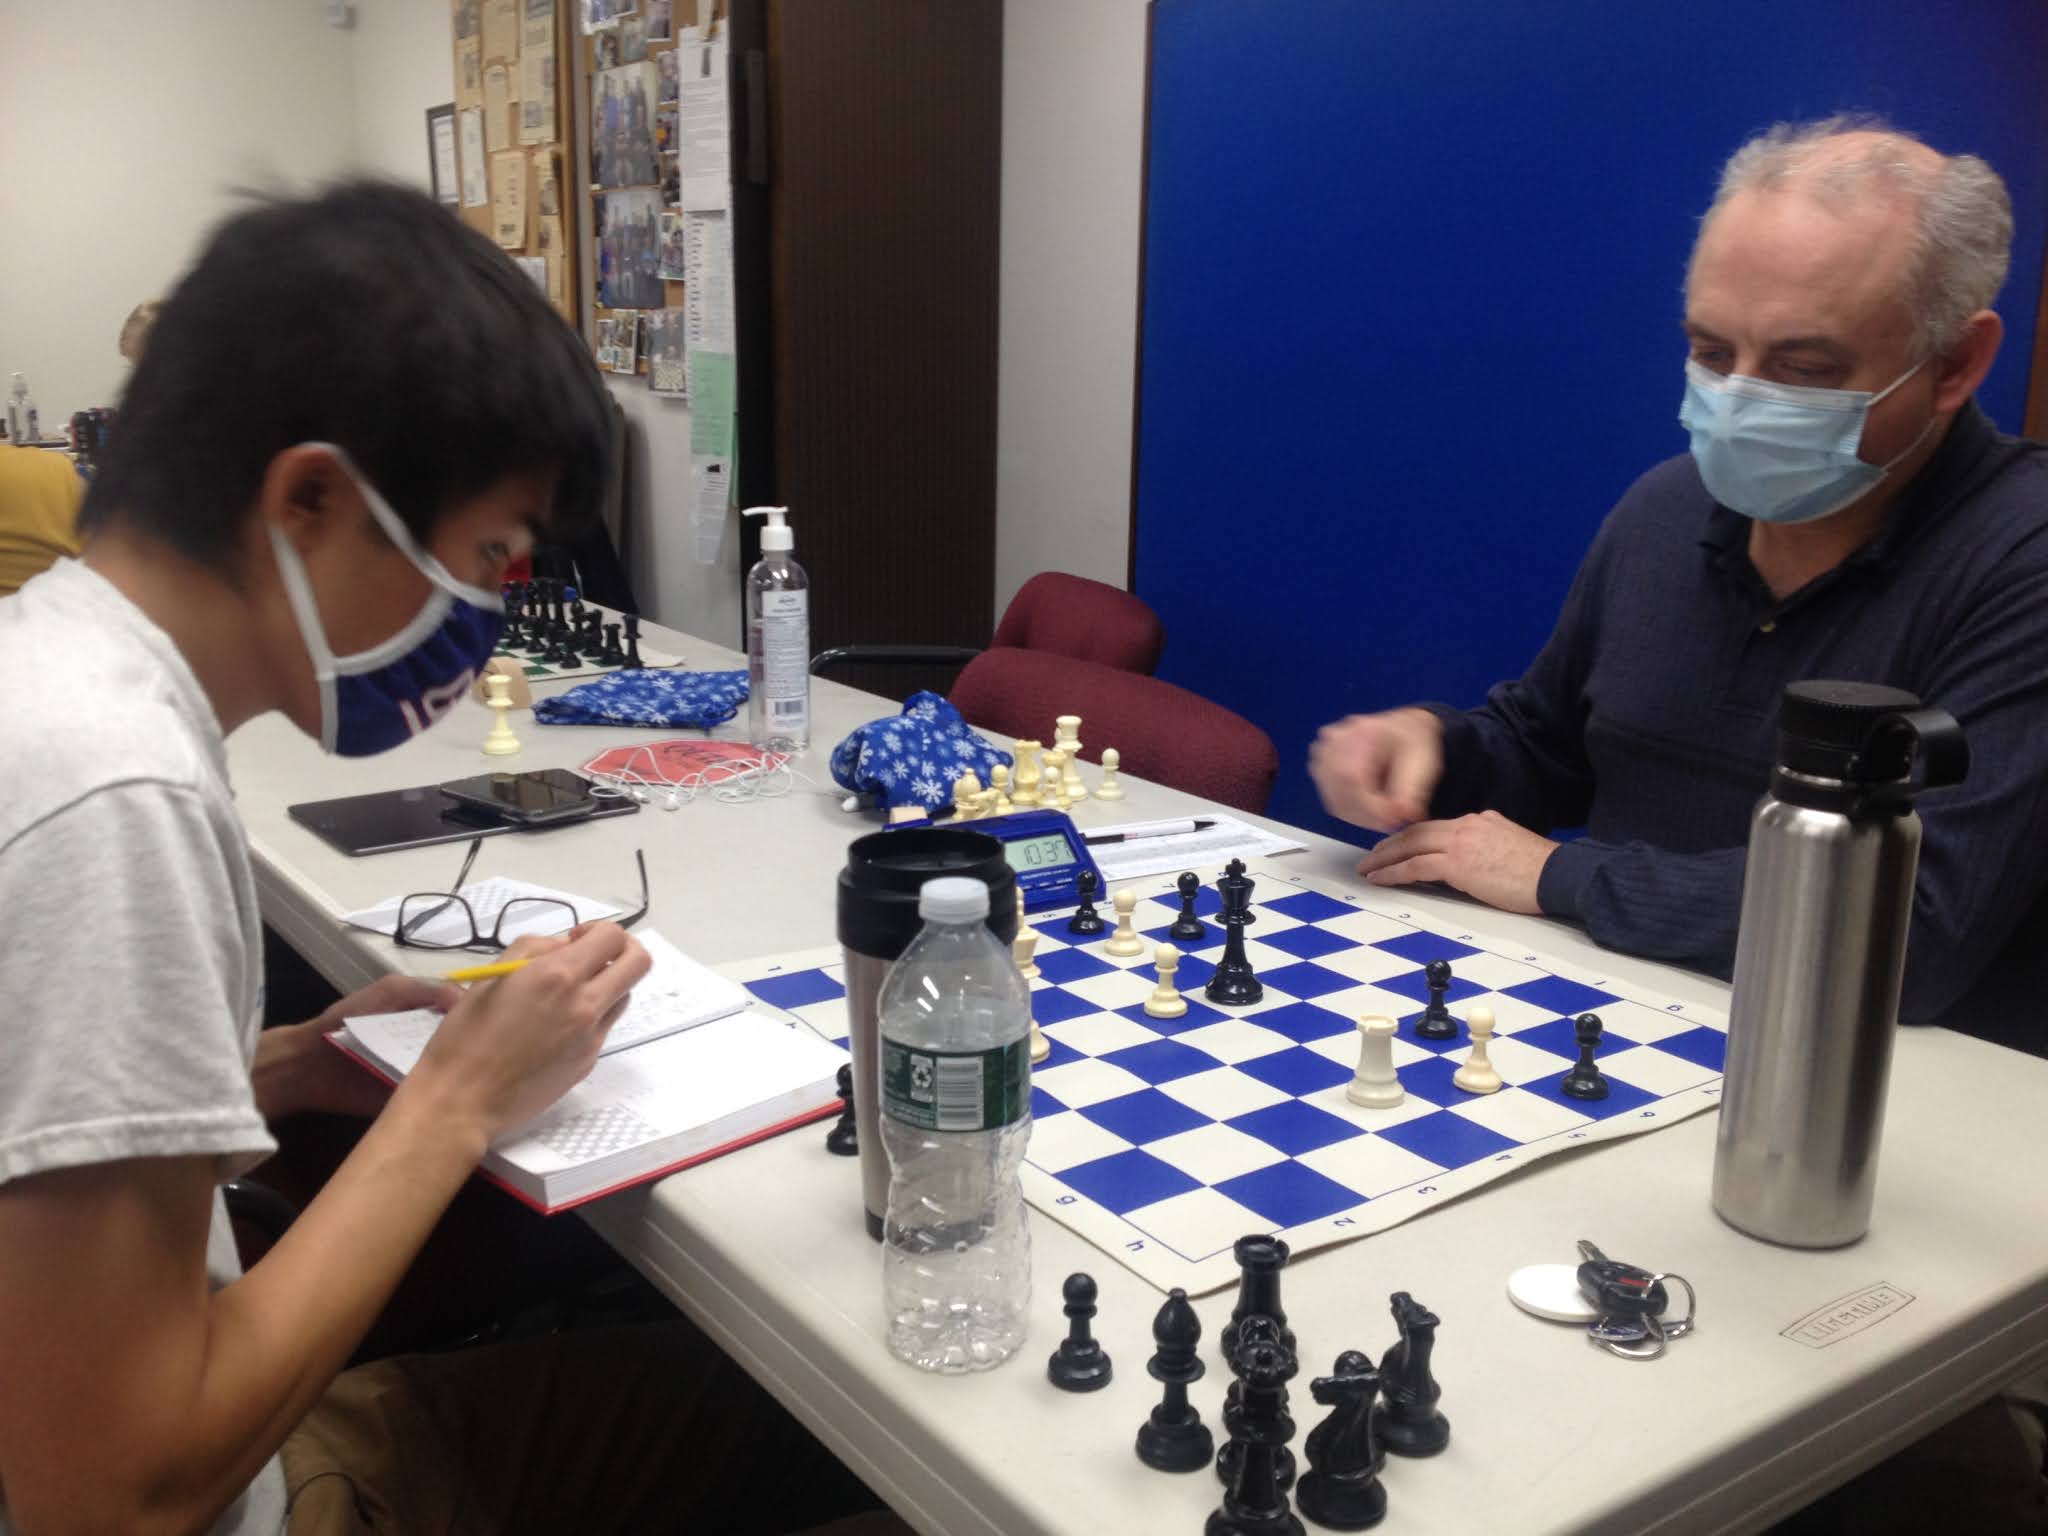 The Rochester Chess Club Game Database